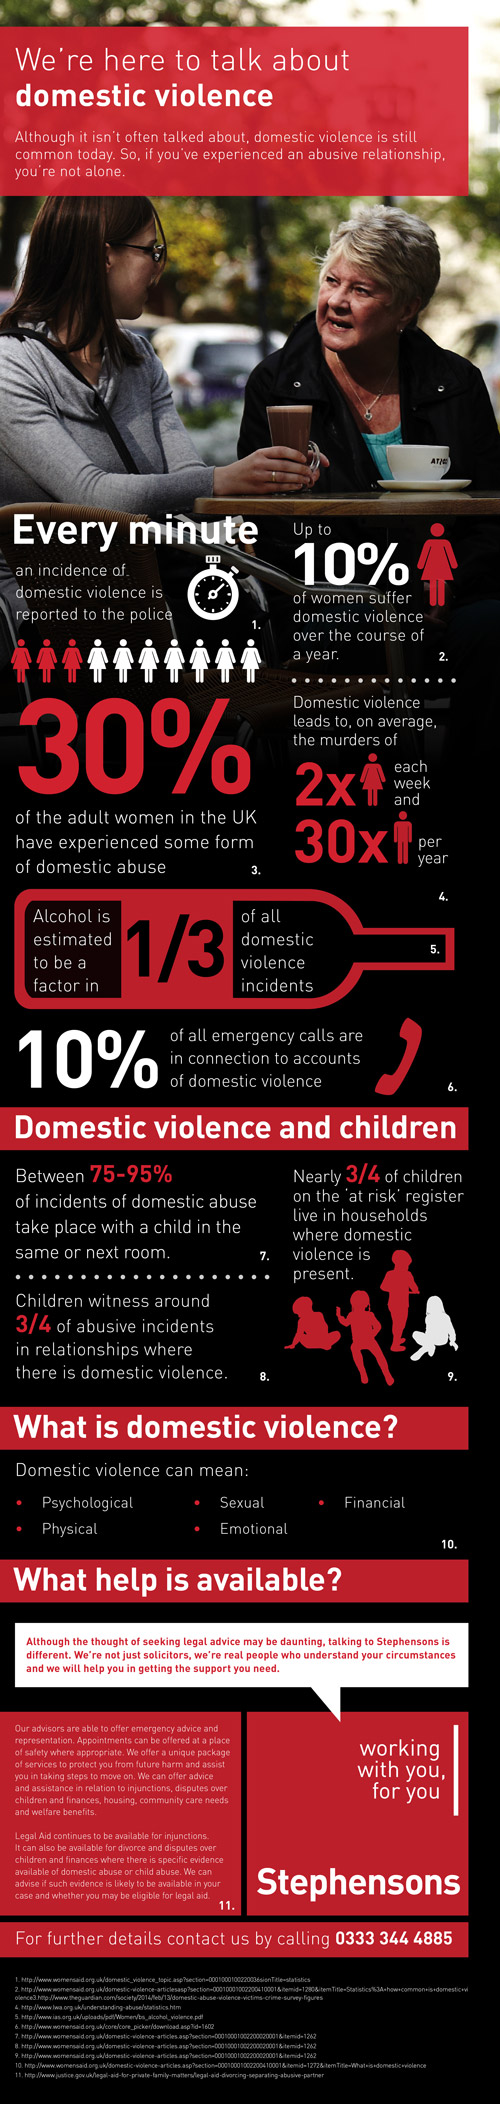 Domestic Violence - Infographic